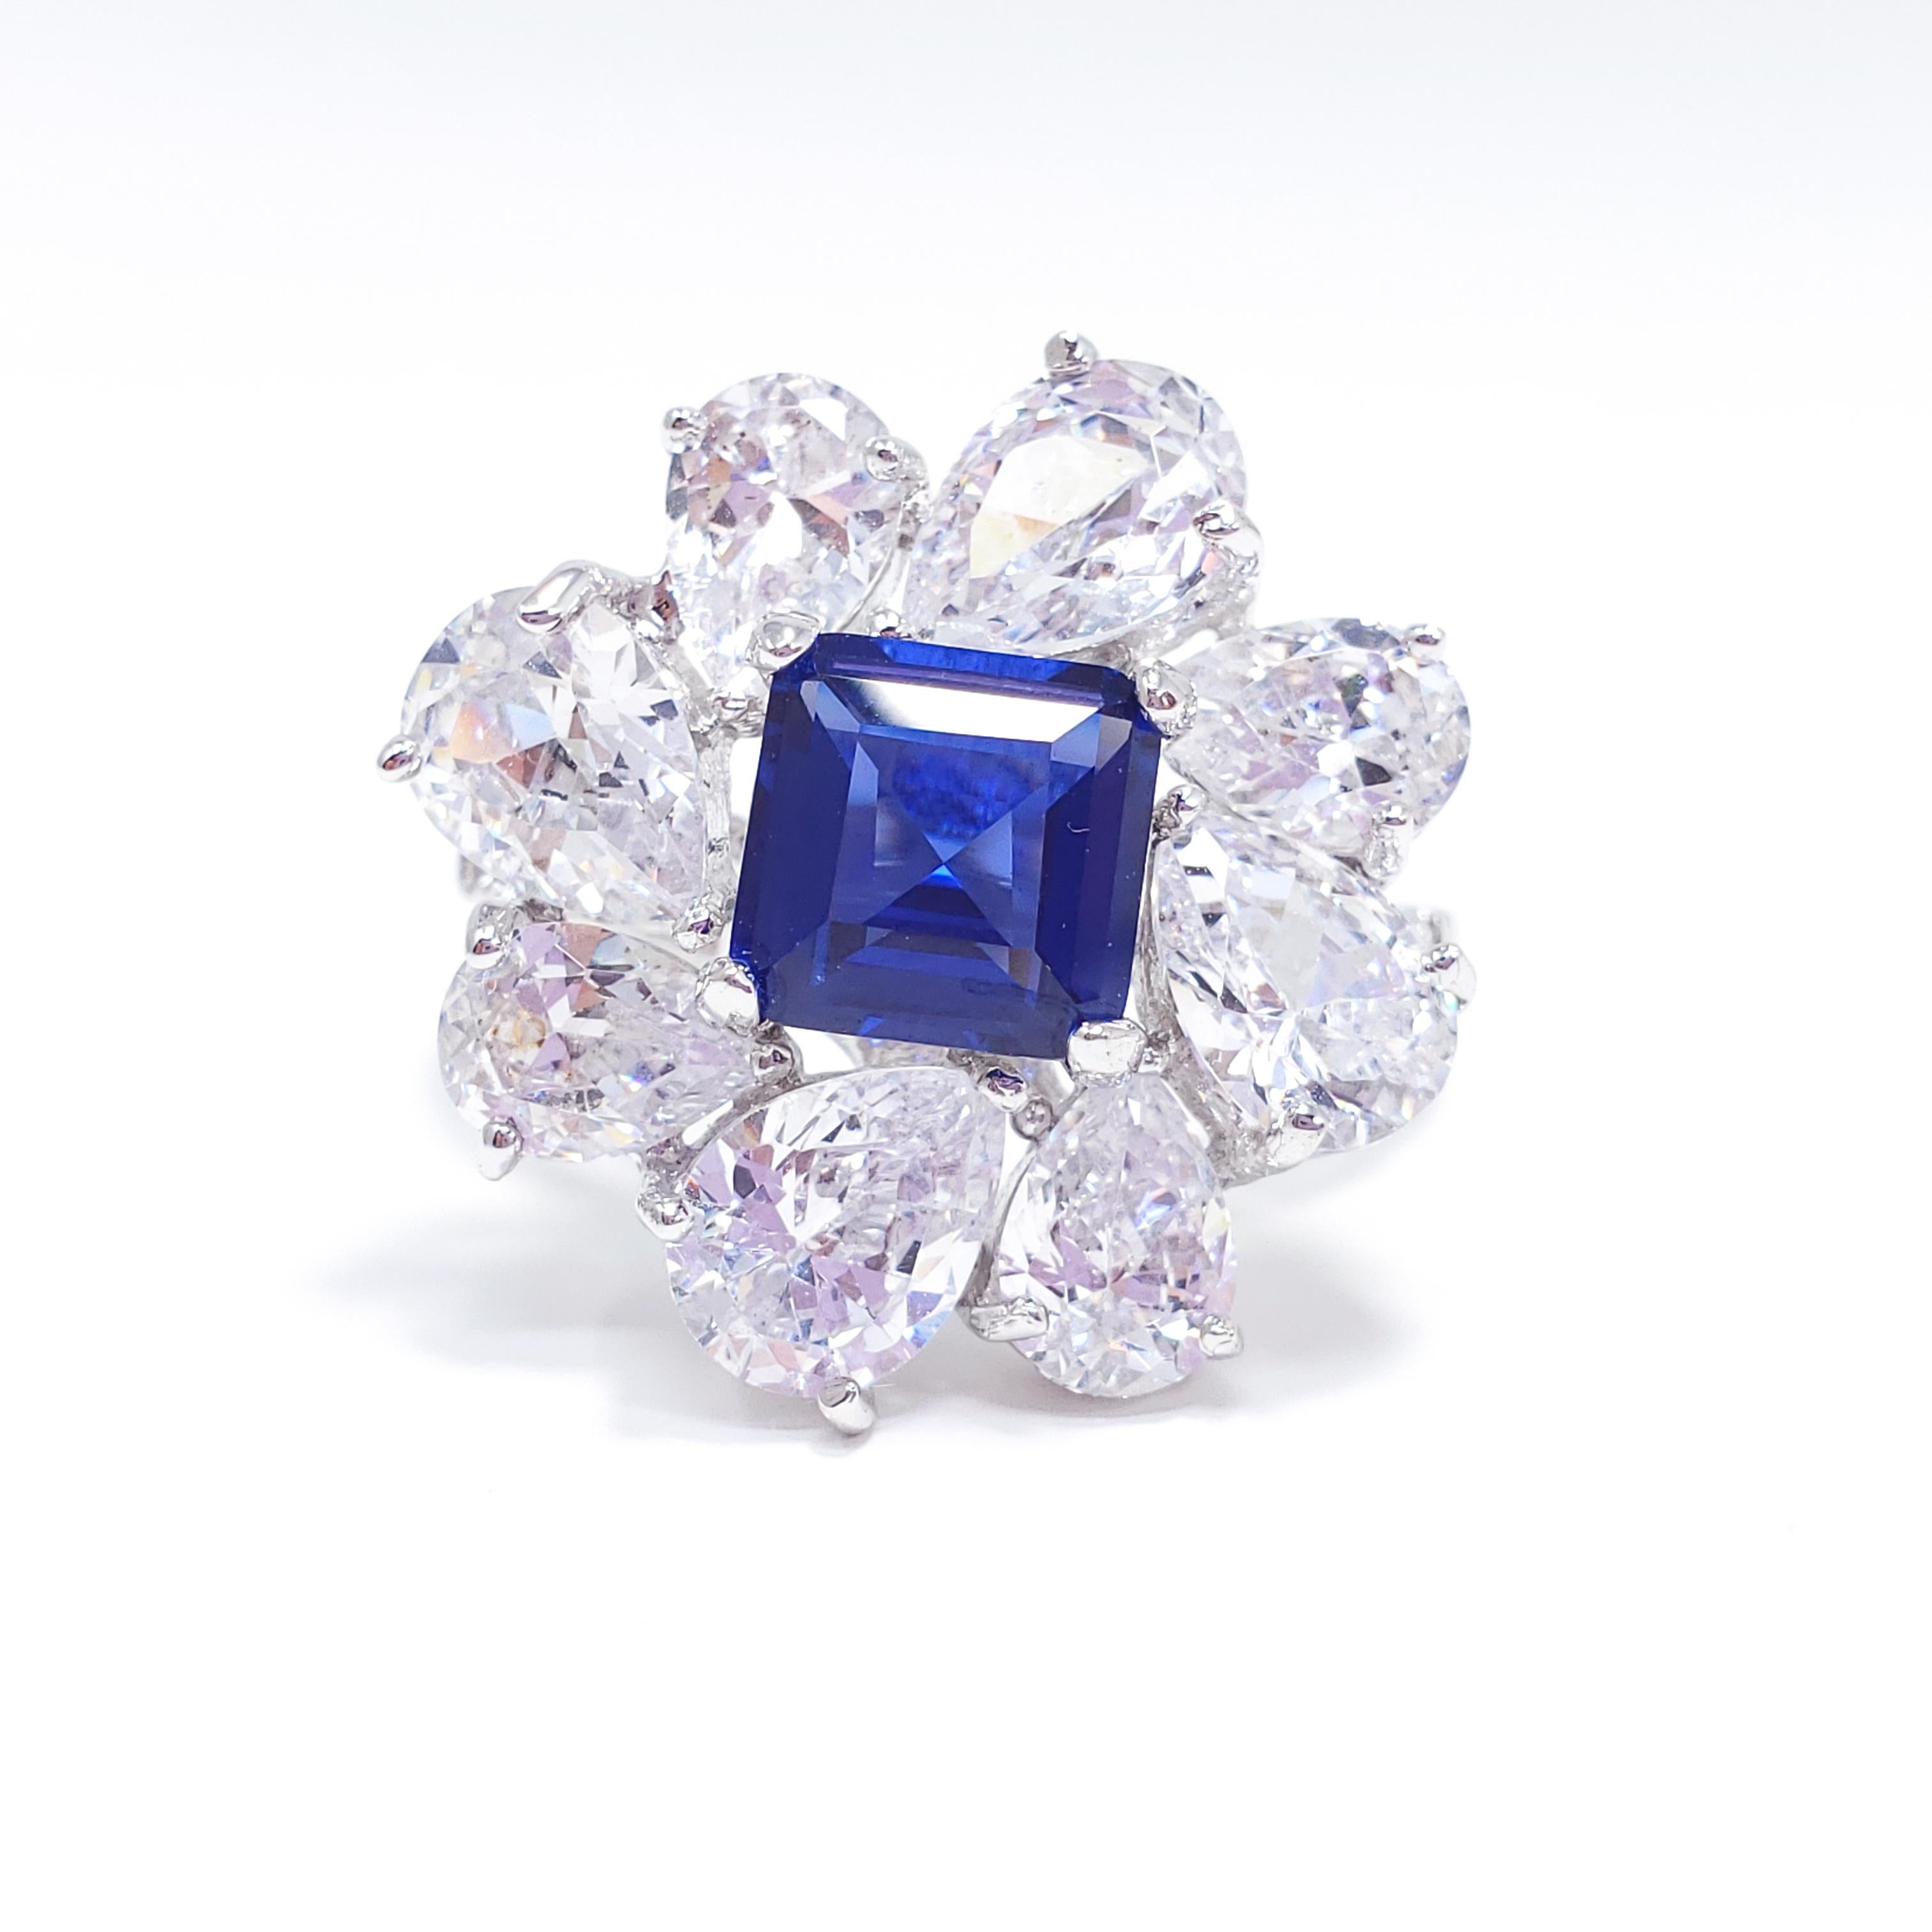 A dazzling cocktail ring by Kenneth Jay Lane. Features a elevated prong-set centerpiece cubic zirconia in sapphire blue, surrounded by clear pear shaped zirconia gems. Smaller crystals accent the front of the band as well. Vibrant rhodium plated